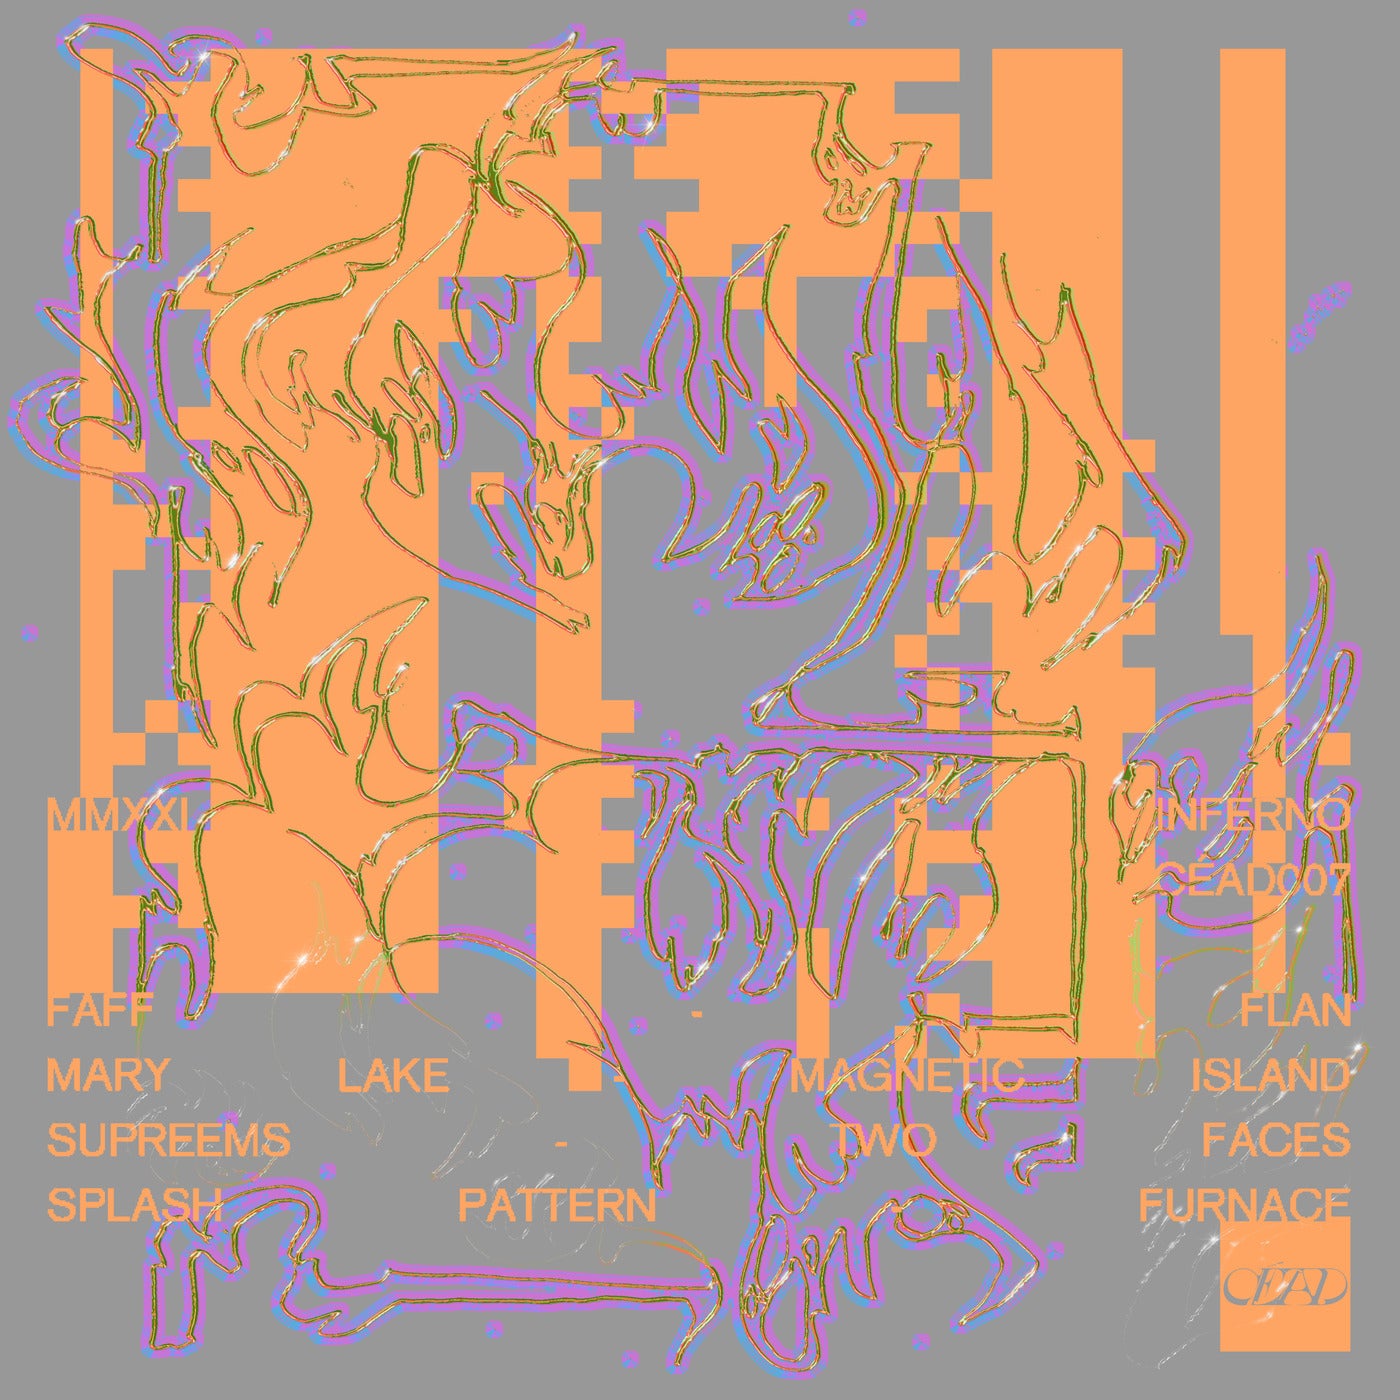 image cover: Faff, Mary Lake, Supreems, Splash Pattern - MMXXI Inferno / CEAD007